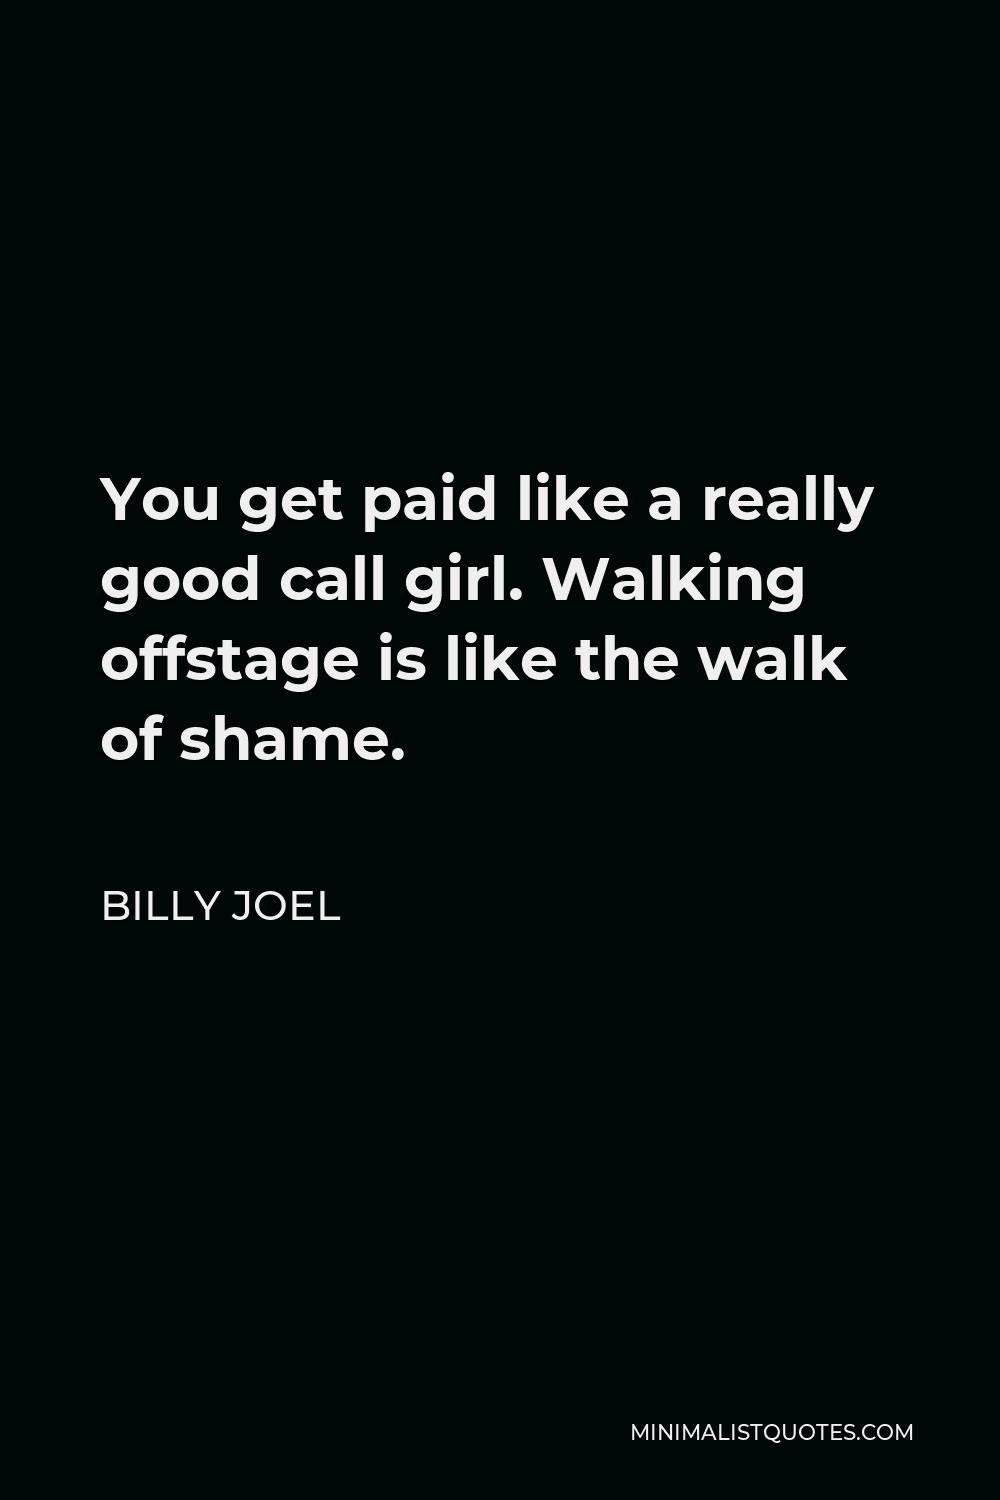 Billy Joel Quote - You get paid like a really good call girl. Walking offstage is like the walk of shame.